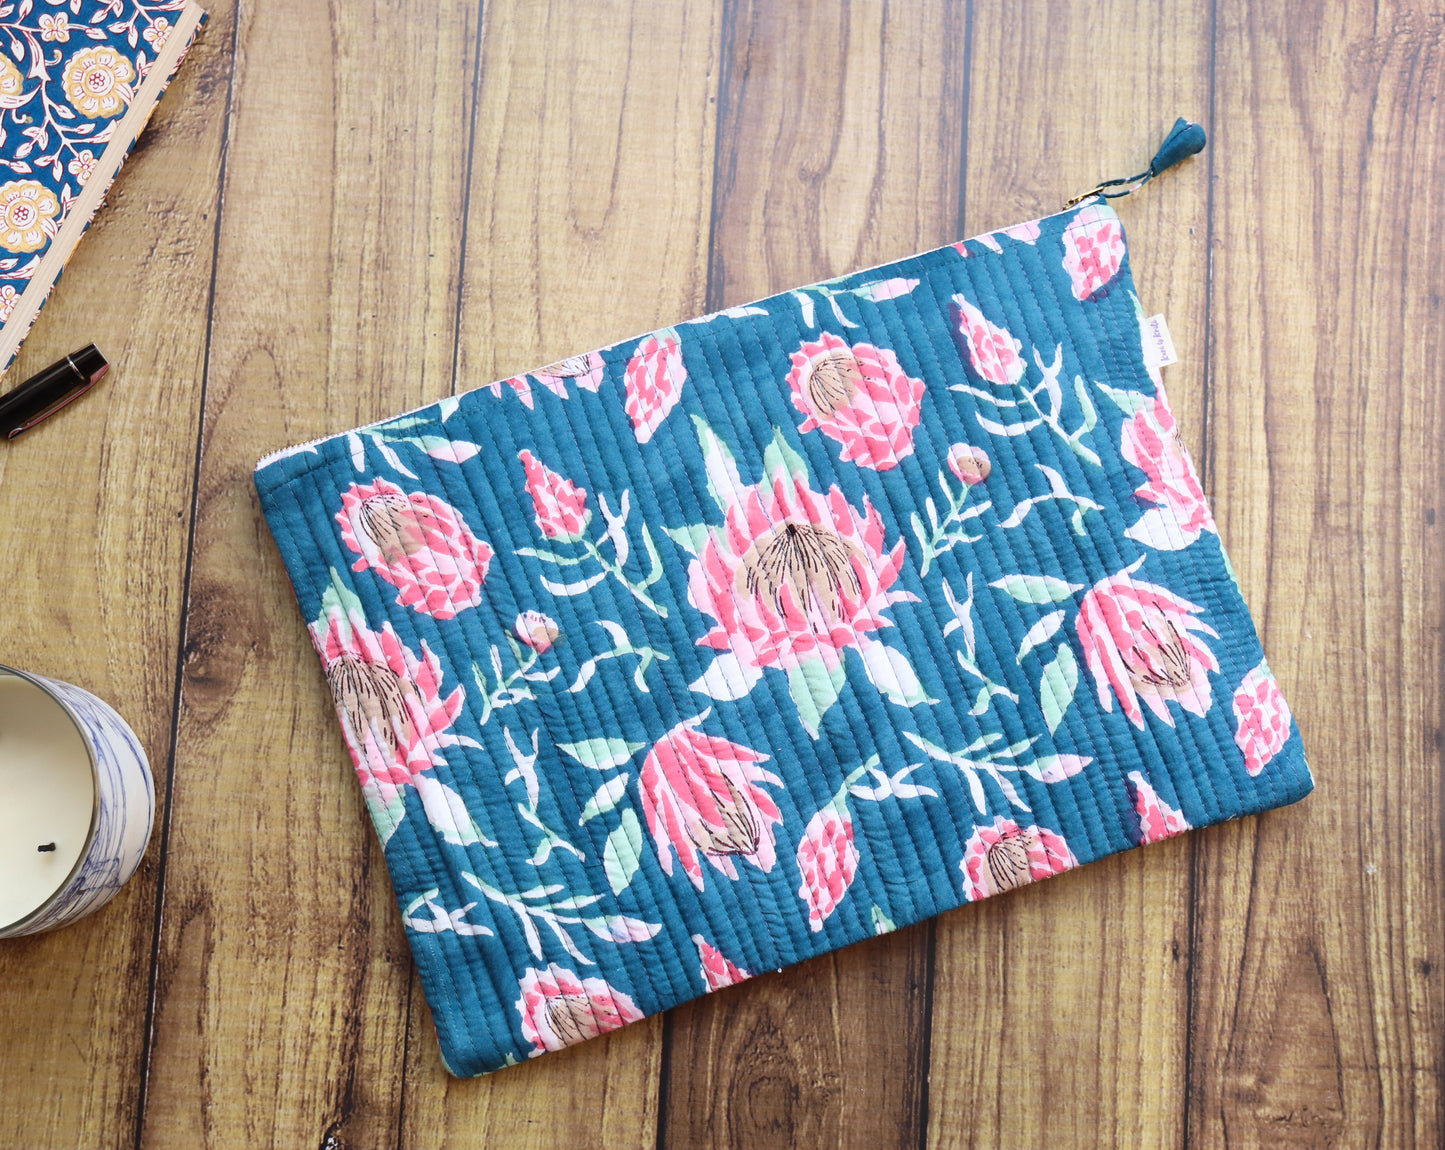 Block print Laptop sleeves - Laptop cover - Blue Lotus - 13 inch, 14 inch & 15 inch